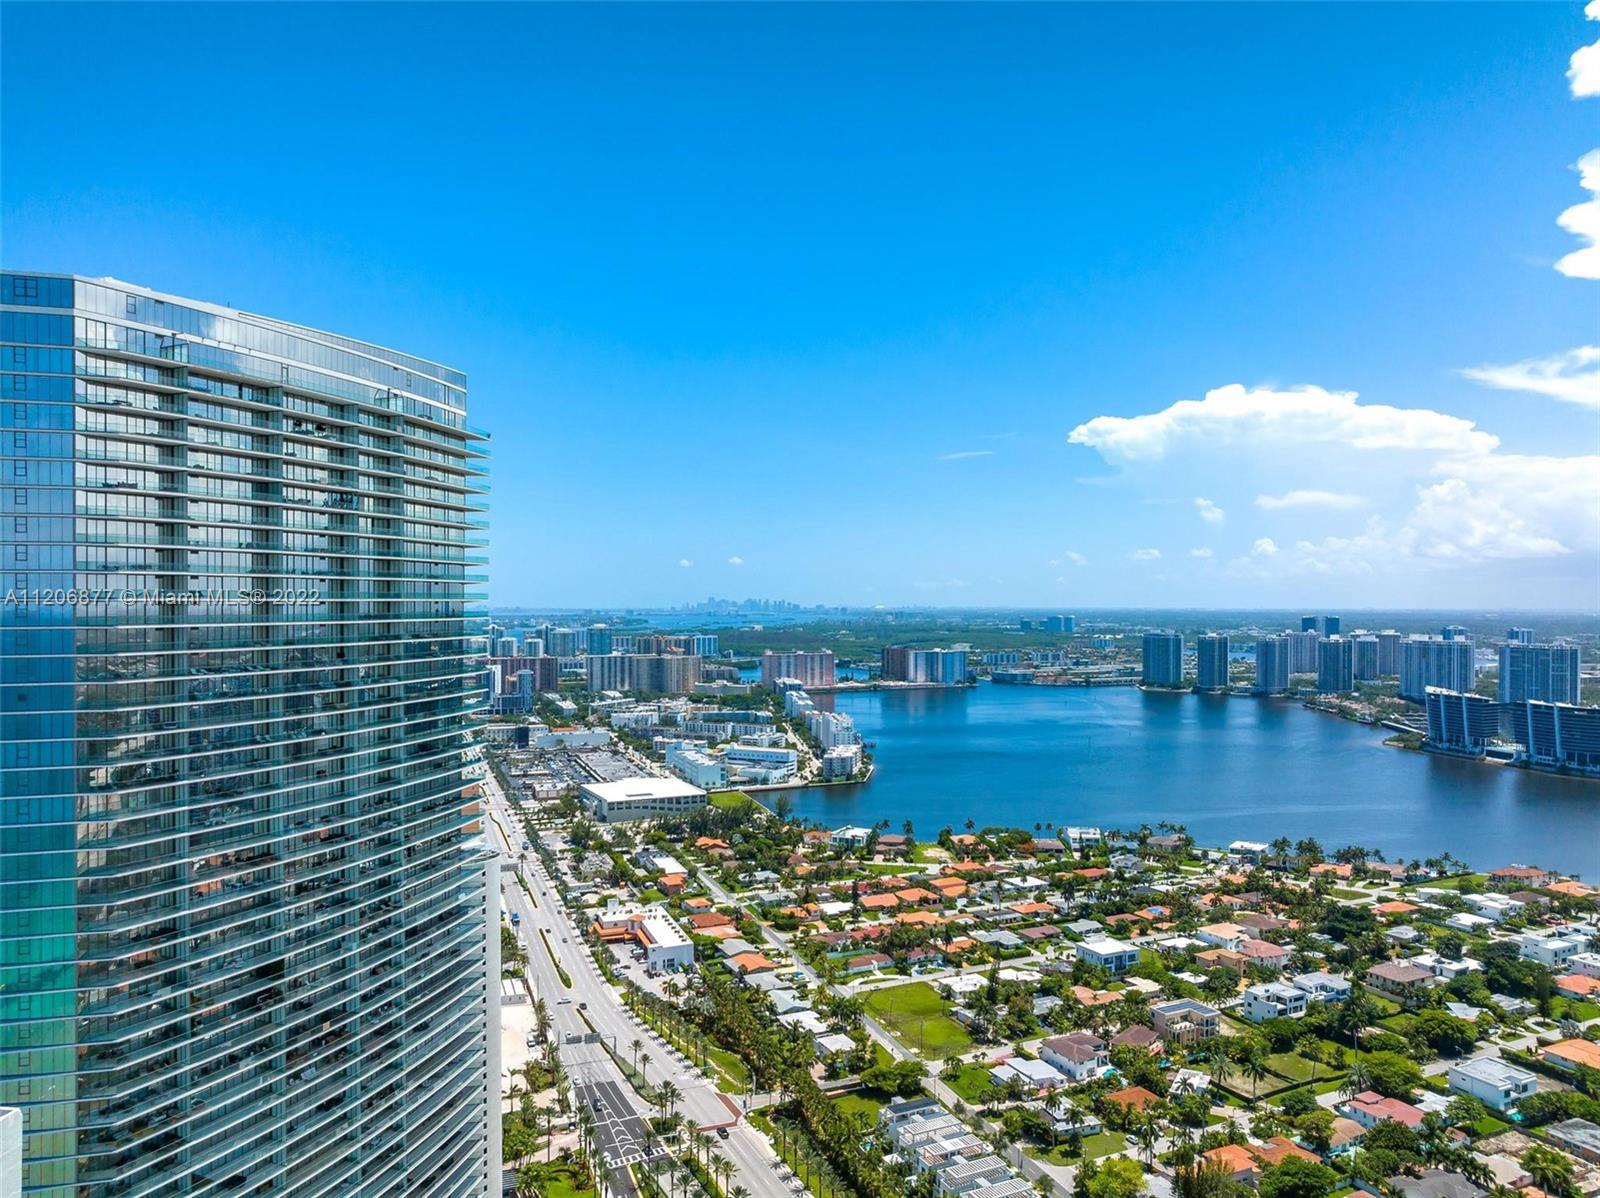 A truly beautiful fully furnished 2-bedroom apartment at Residences by Armani Casa. Top-of-the-line appliances, a barbeque grill on the balcony area, an extensive wraparound balcony, stunning ocean, and intercoastal views, and world-class amenities curated by Giorgio Armani Design Team.